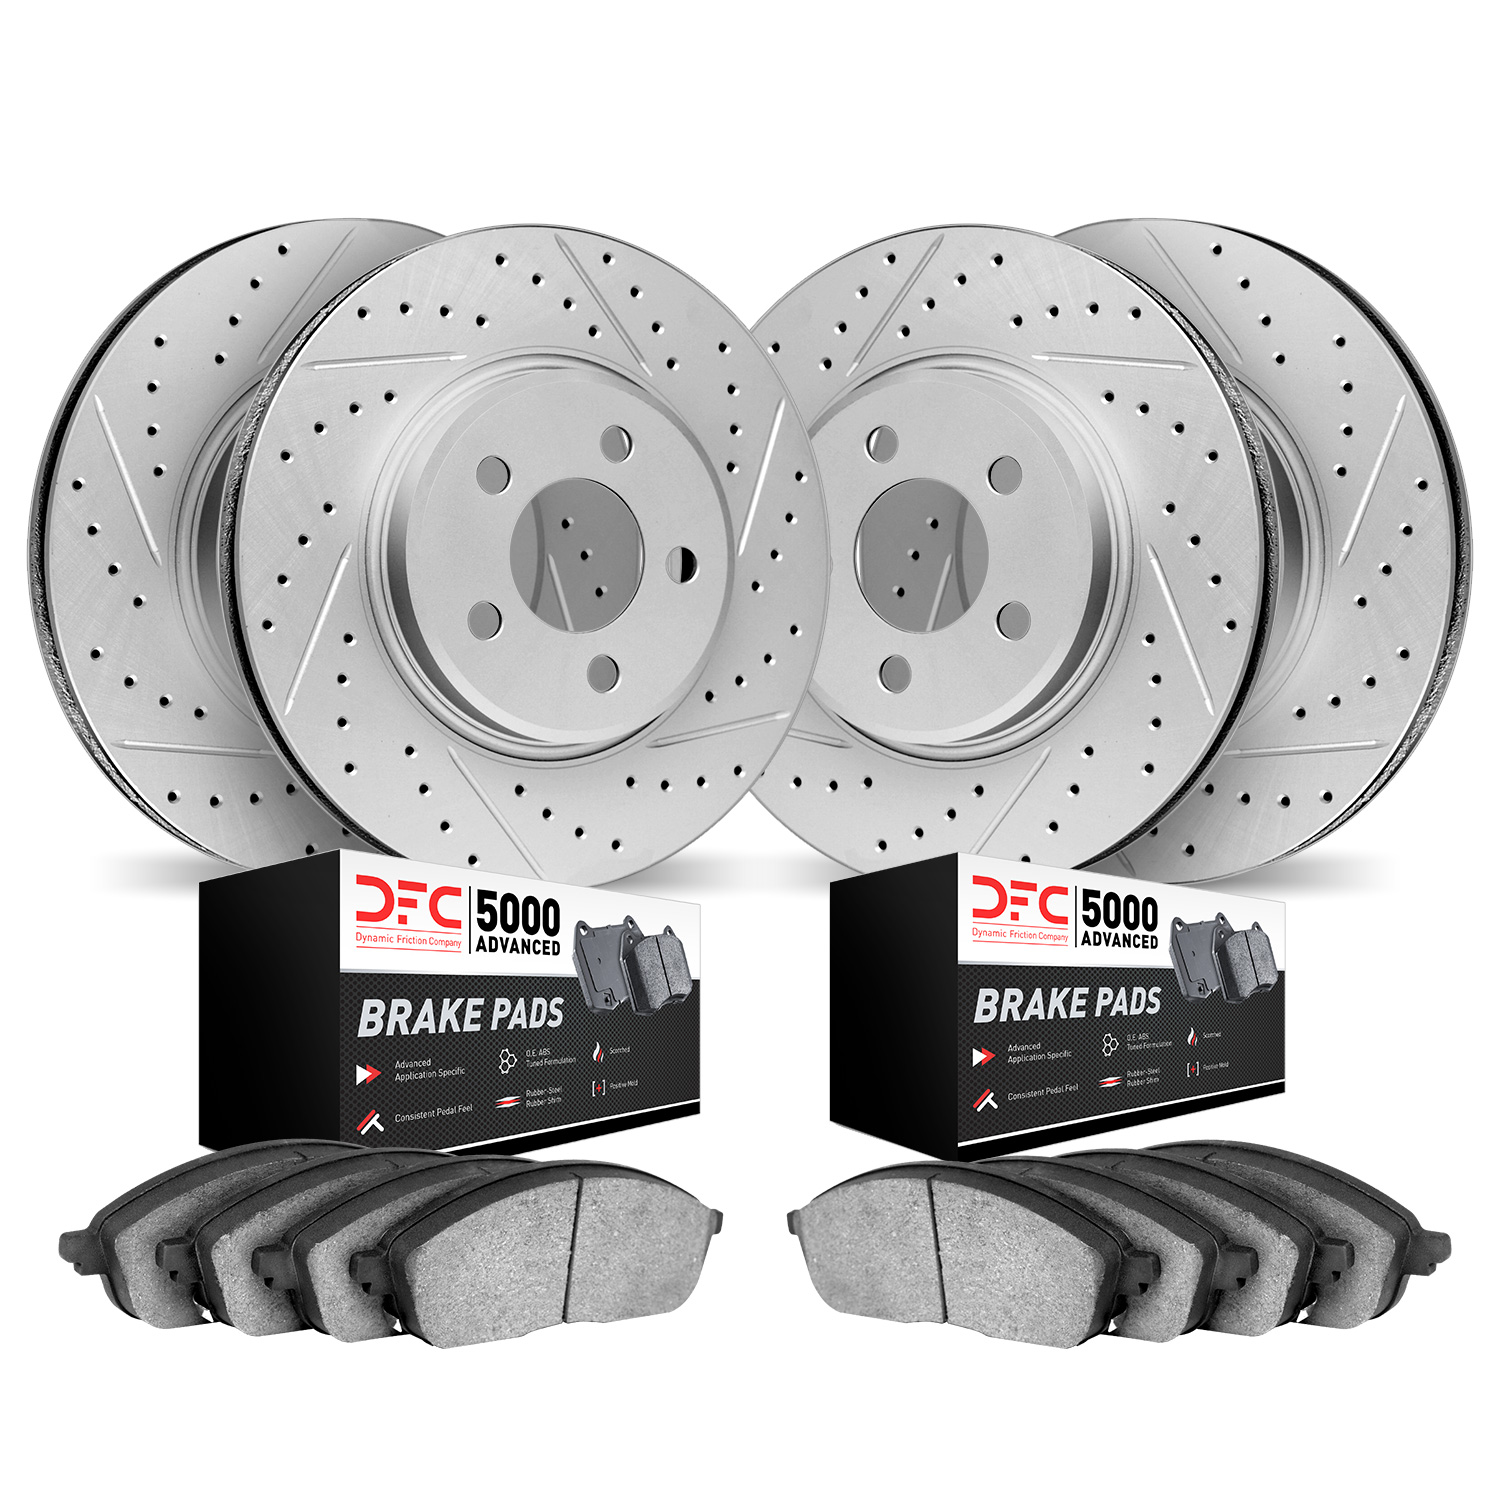 2504-20003 Geoperformance Drilled/Slotted Rotors w/5000 Advanced Brake Pads Kit, 2006-2010 Jaguar, Position: Front and Rear